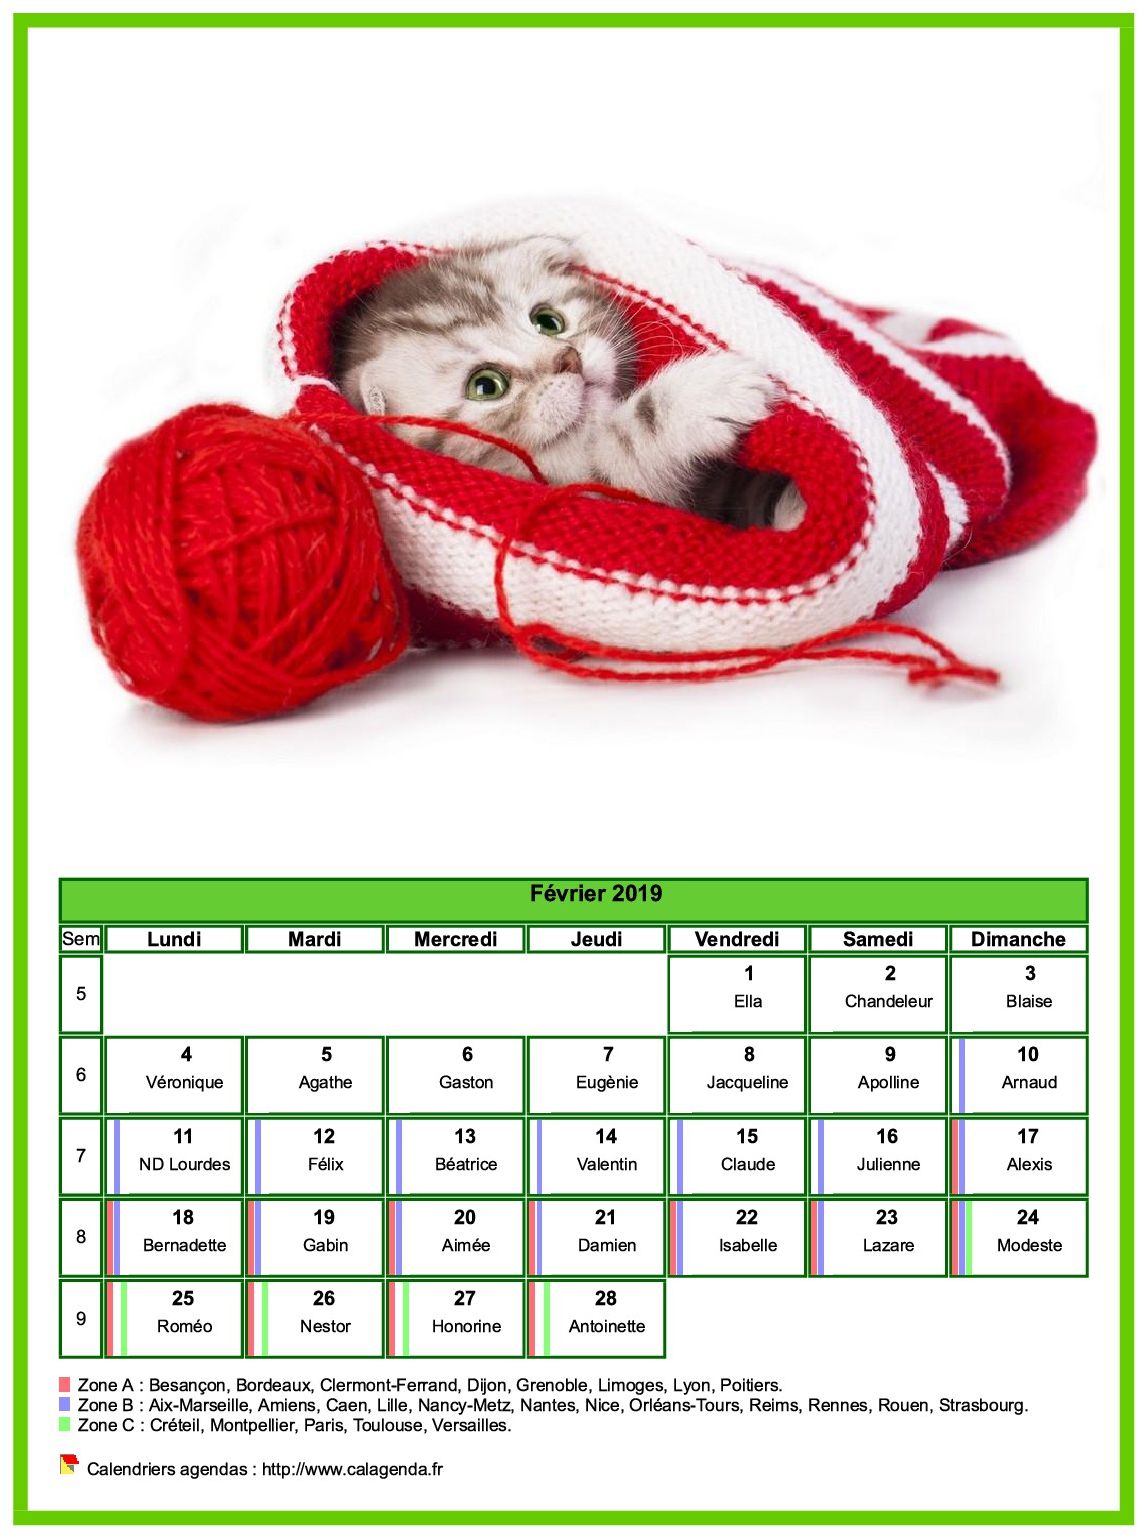 Calendrier Fevrier 19 Chats